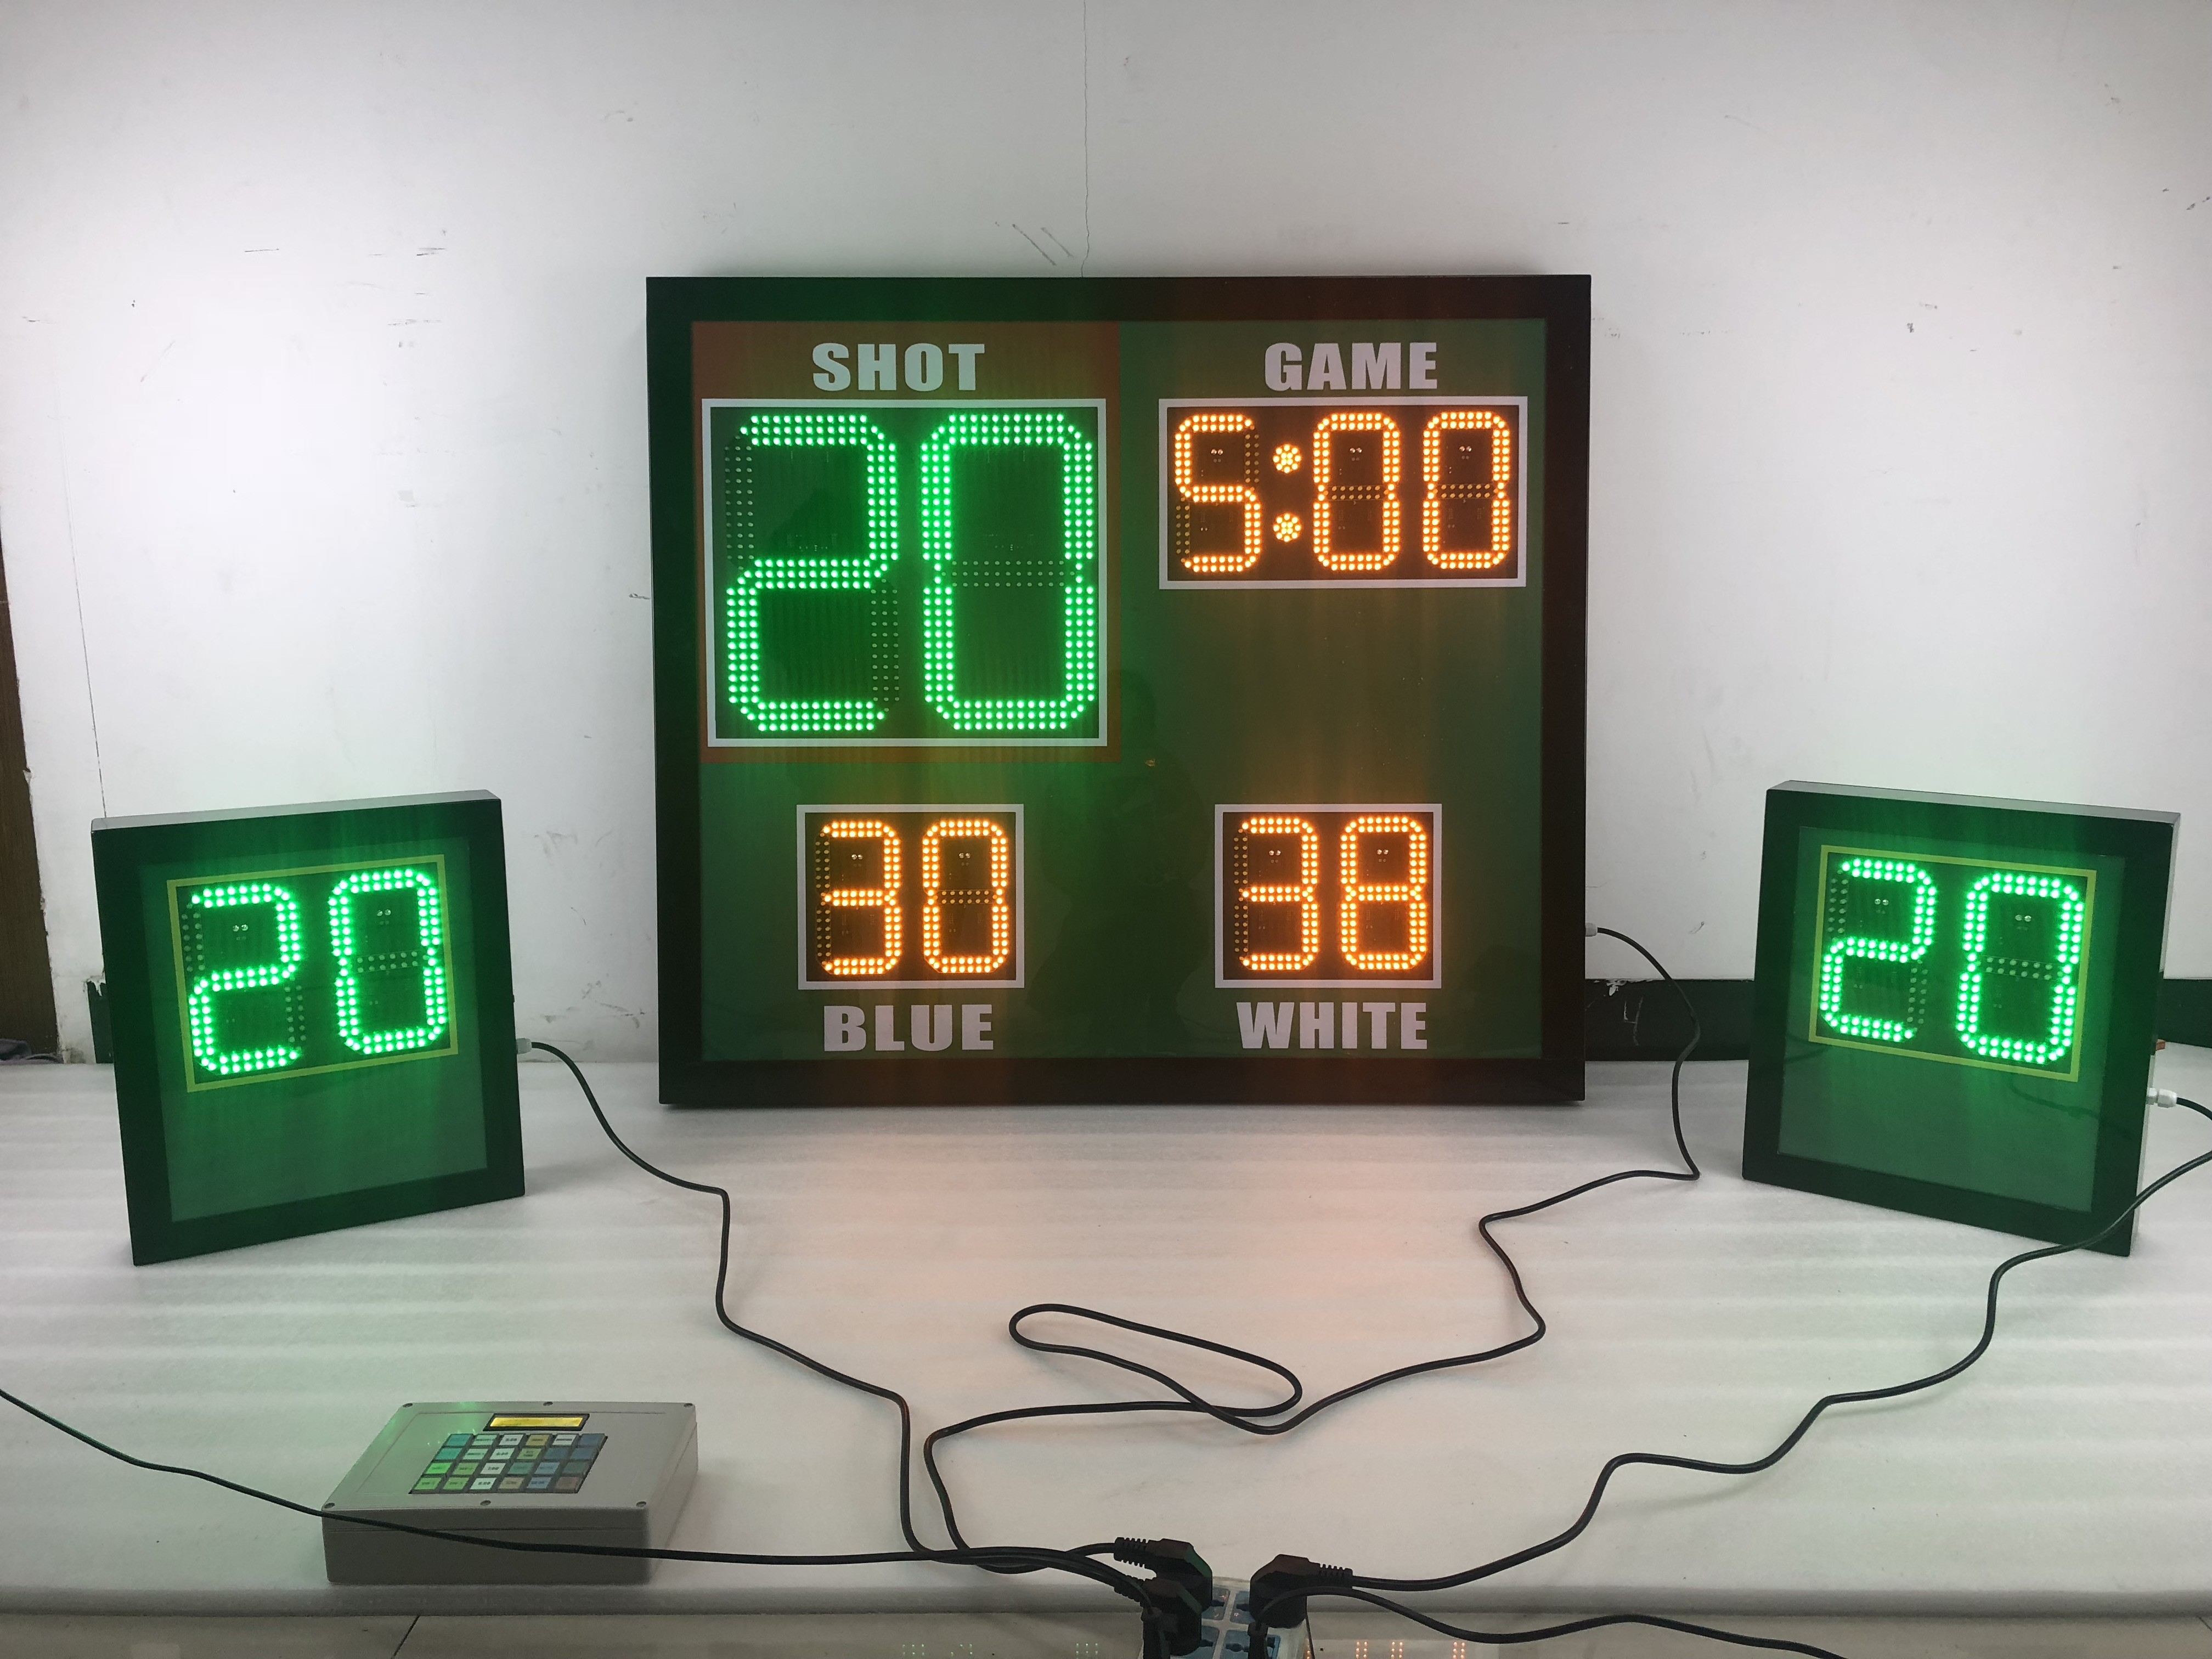 Support 12V Battery Waterpolo Scoreboard With Shot Clock